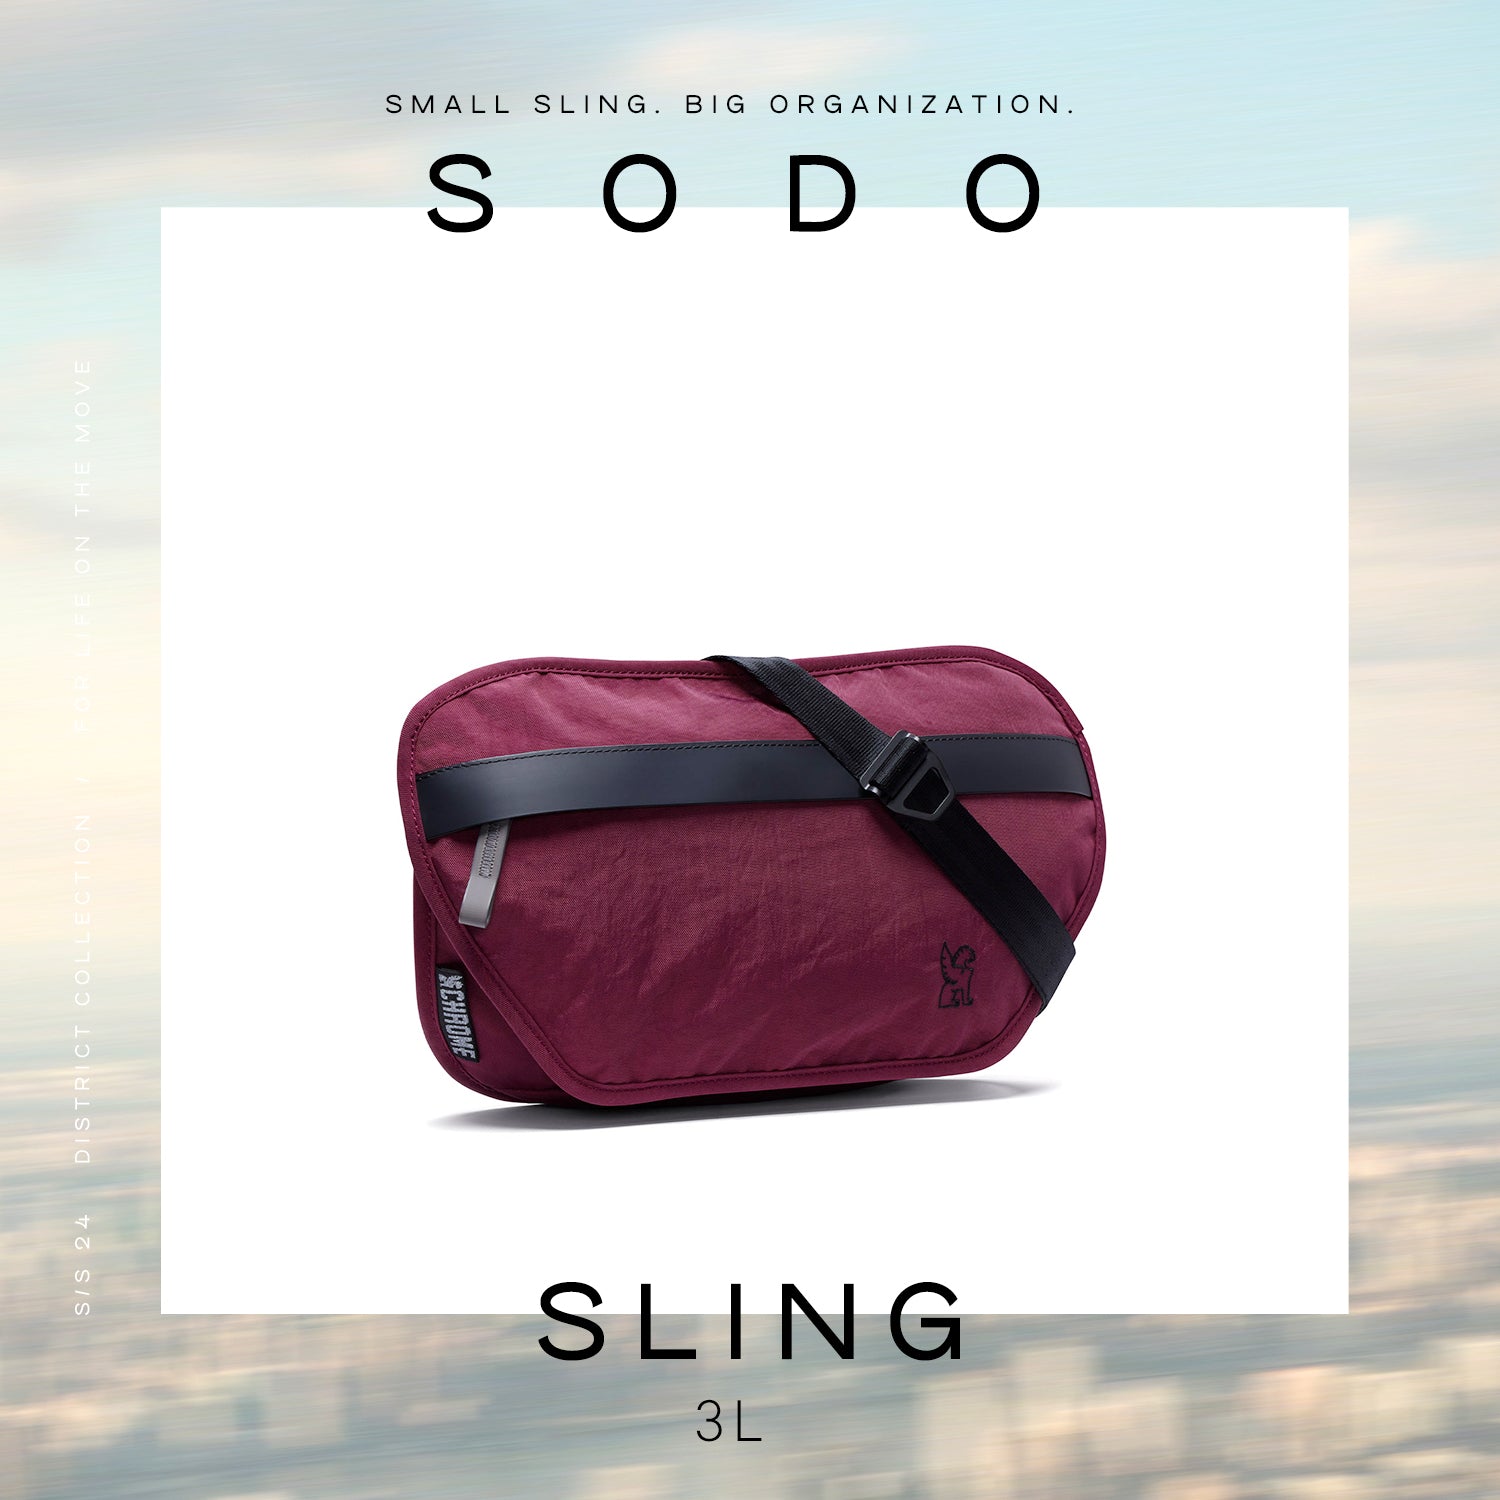 Sodo Sling in royale, part of the district collection